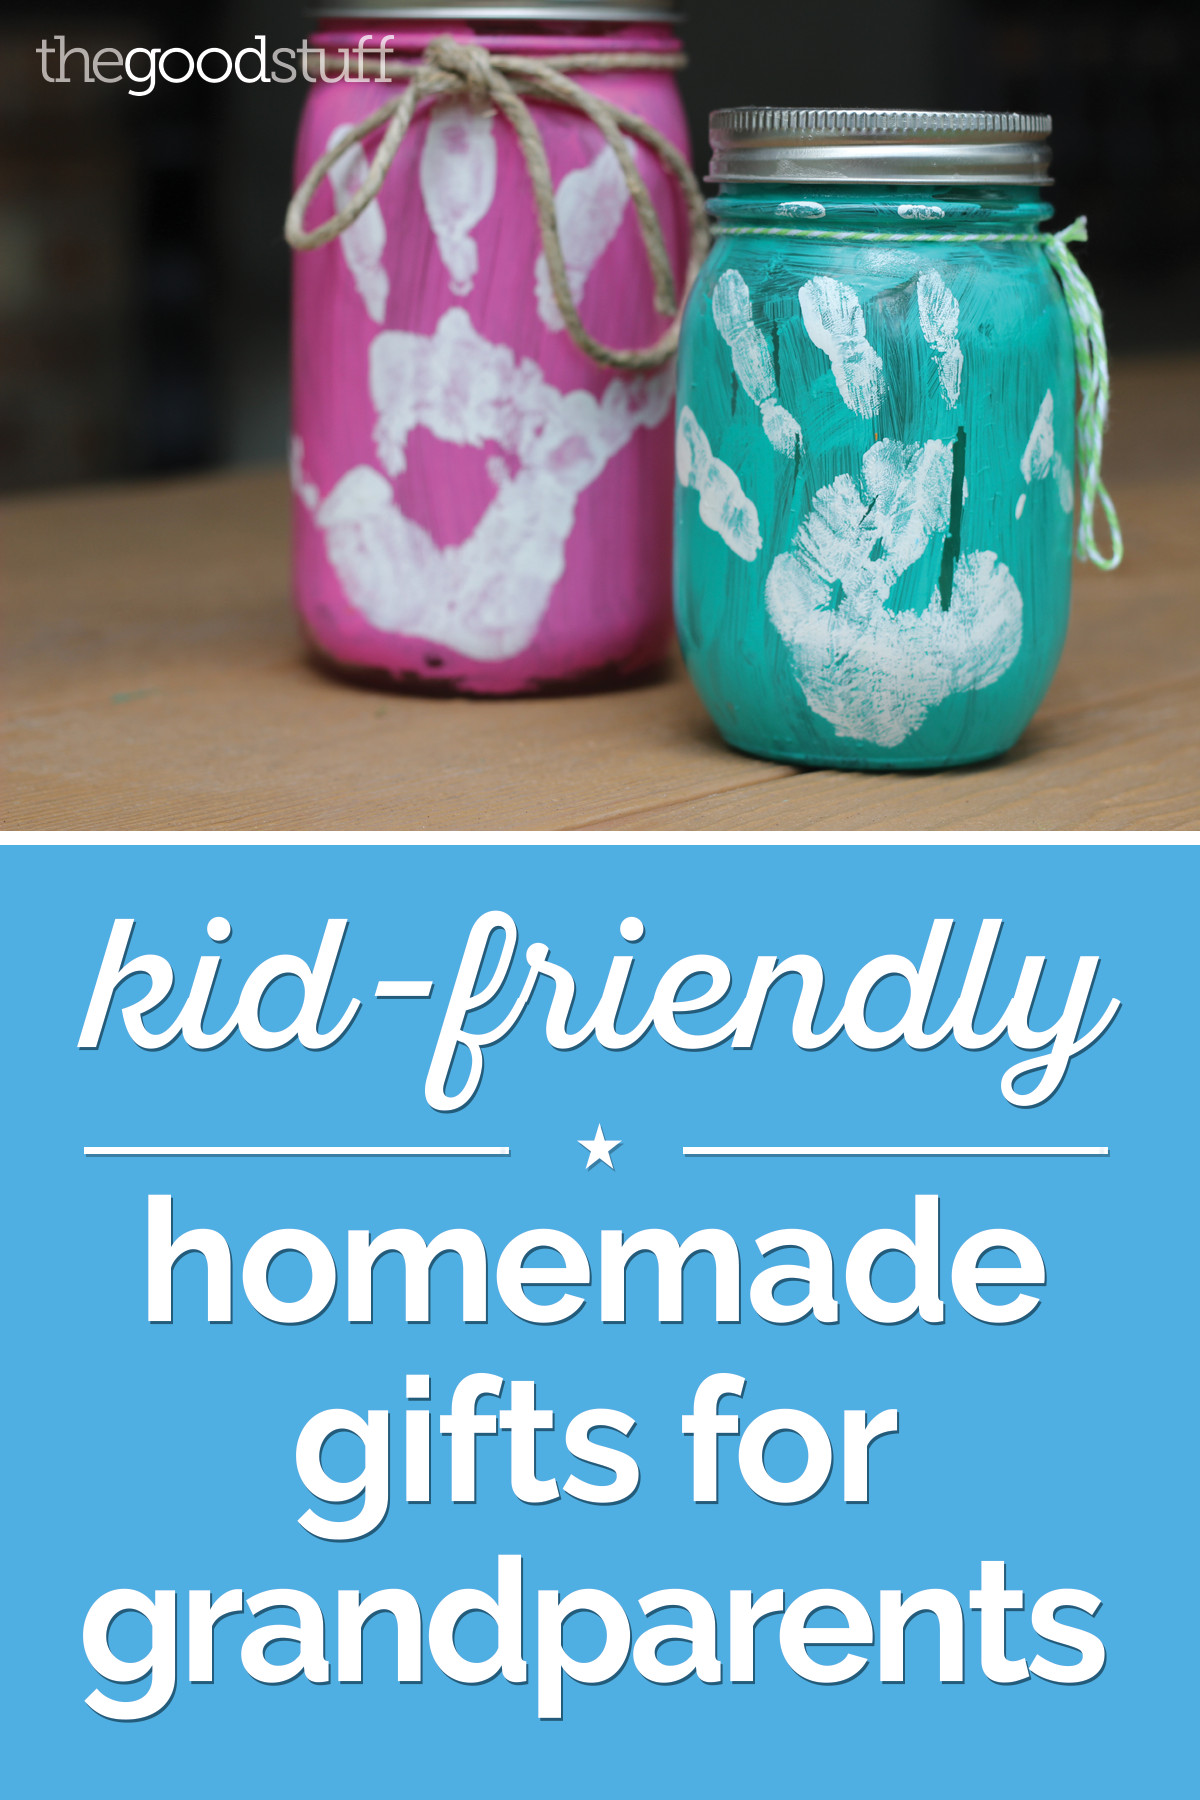 DIY Christmas Gift For Grandparents
 Kid Friendly Homemade Gifts for Grandparents thegoodstuff